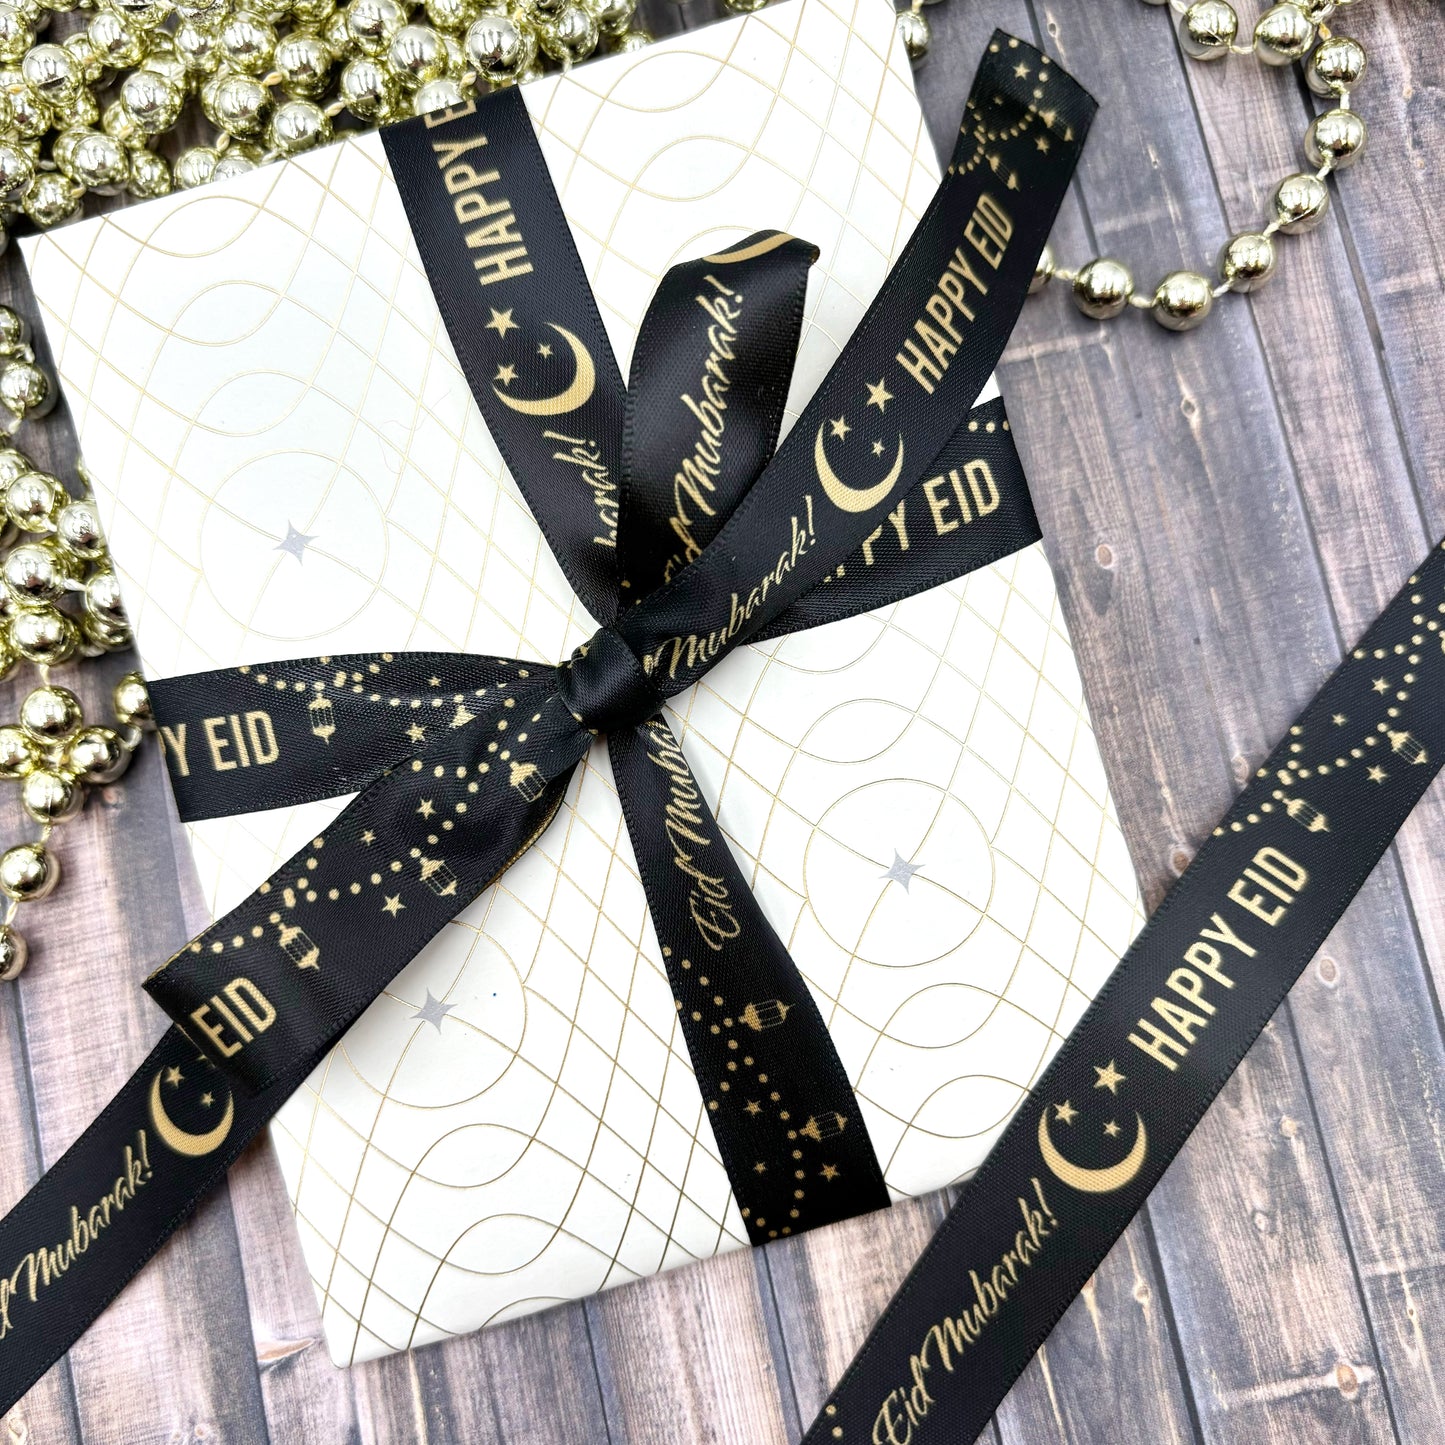 Happy Eid, Eid Mubarak ribbon in gold with a crescent moon and lanterns on a black background printed on 5/8" dijon gold satin